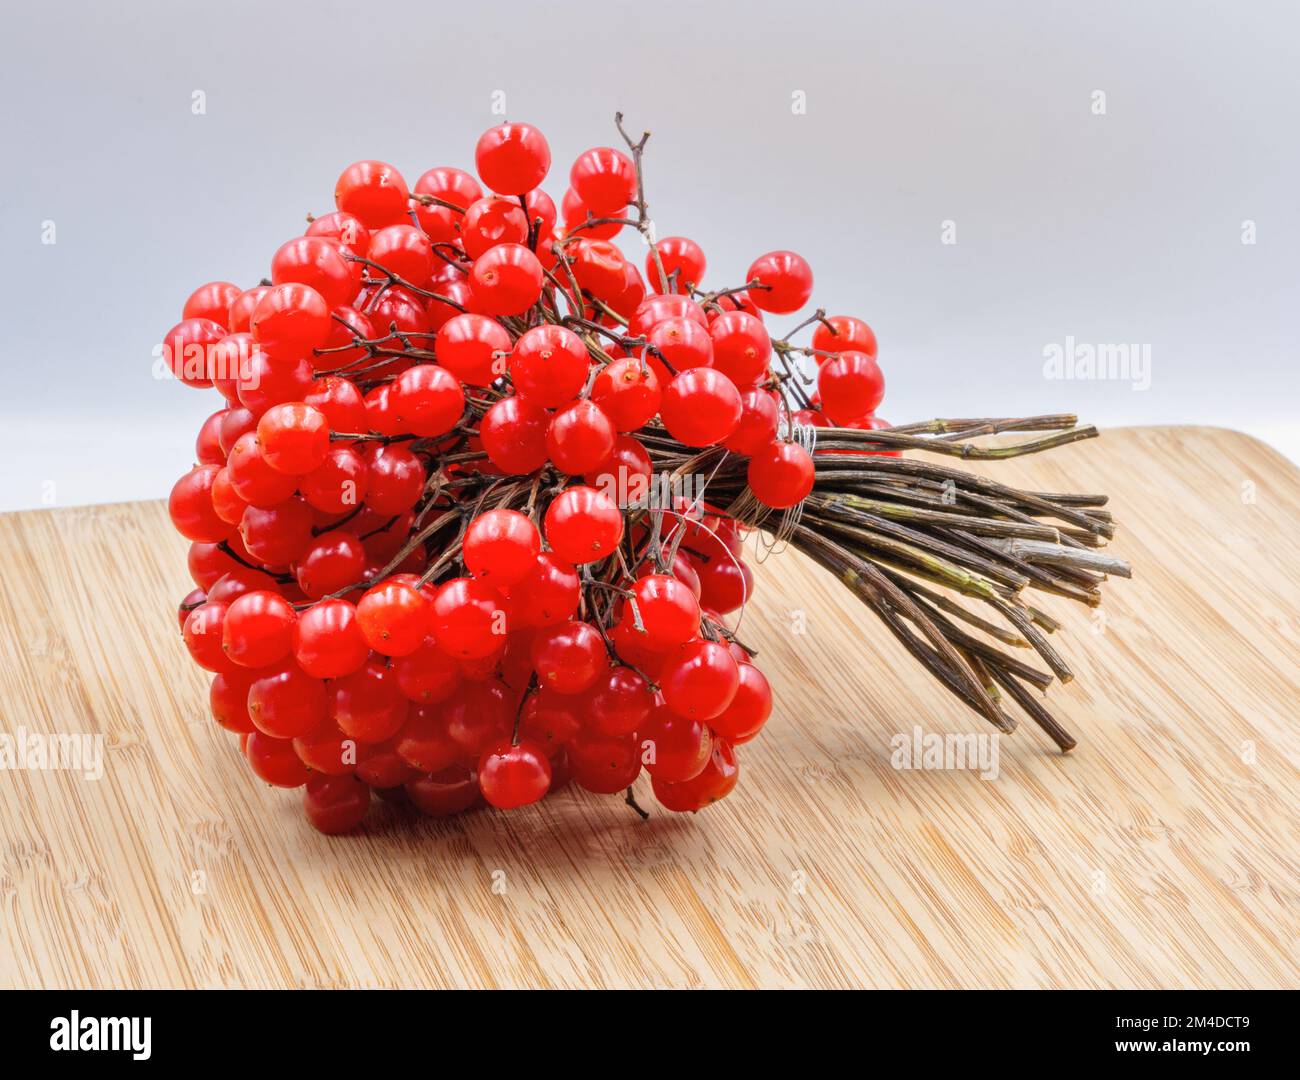 Viburnum red berries closeup on wooden background Stock Photo